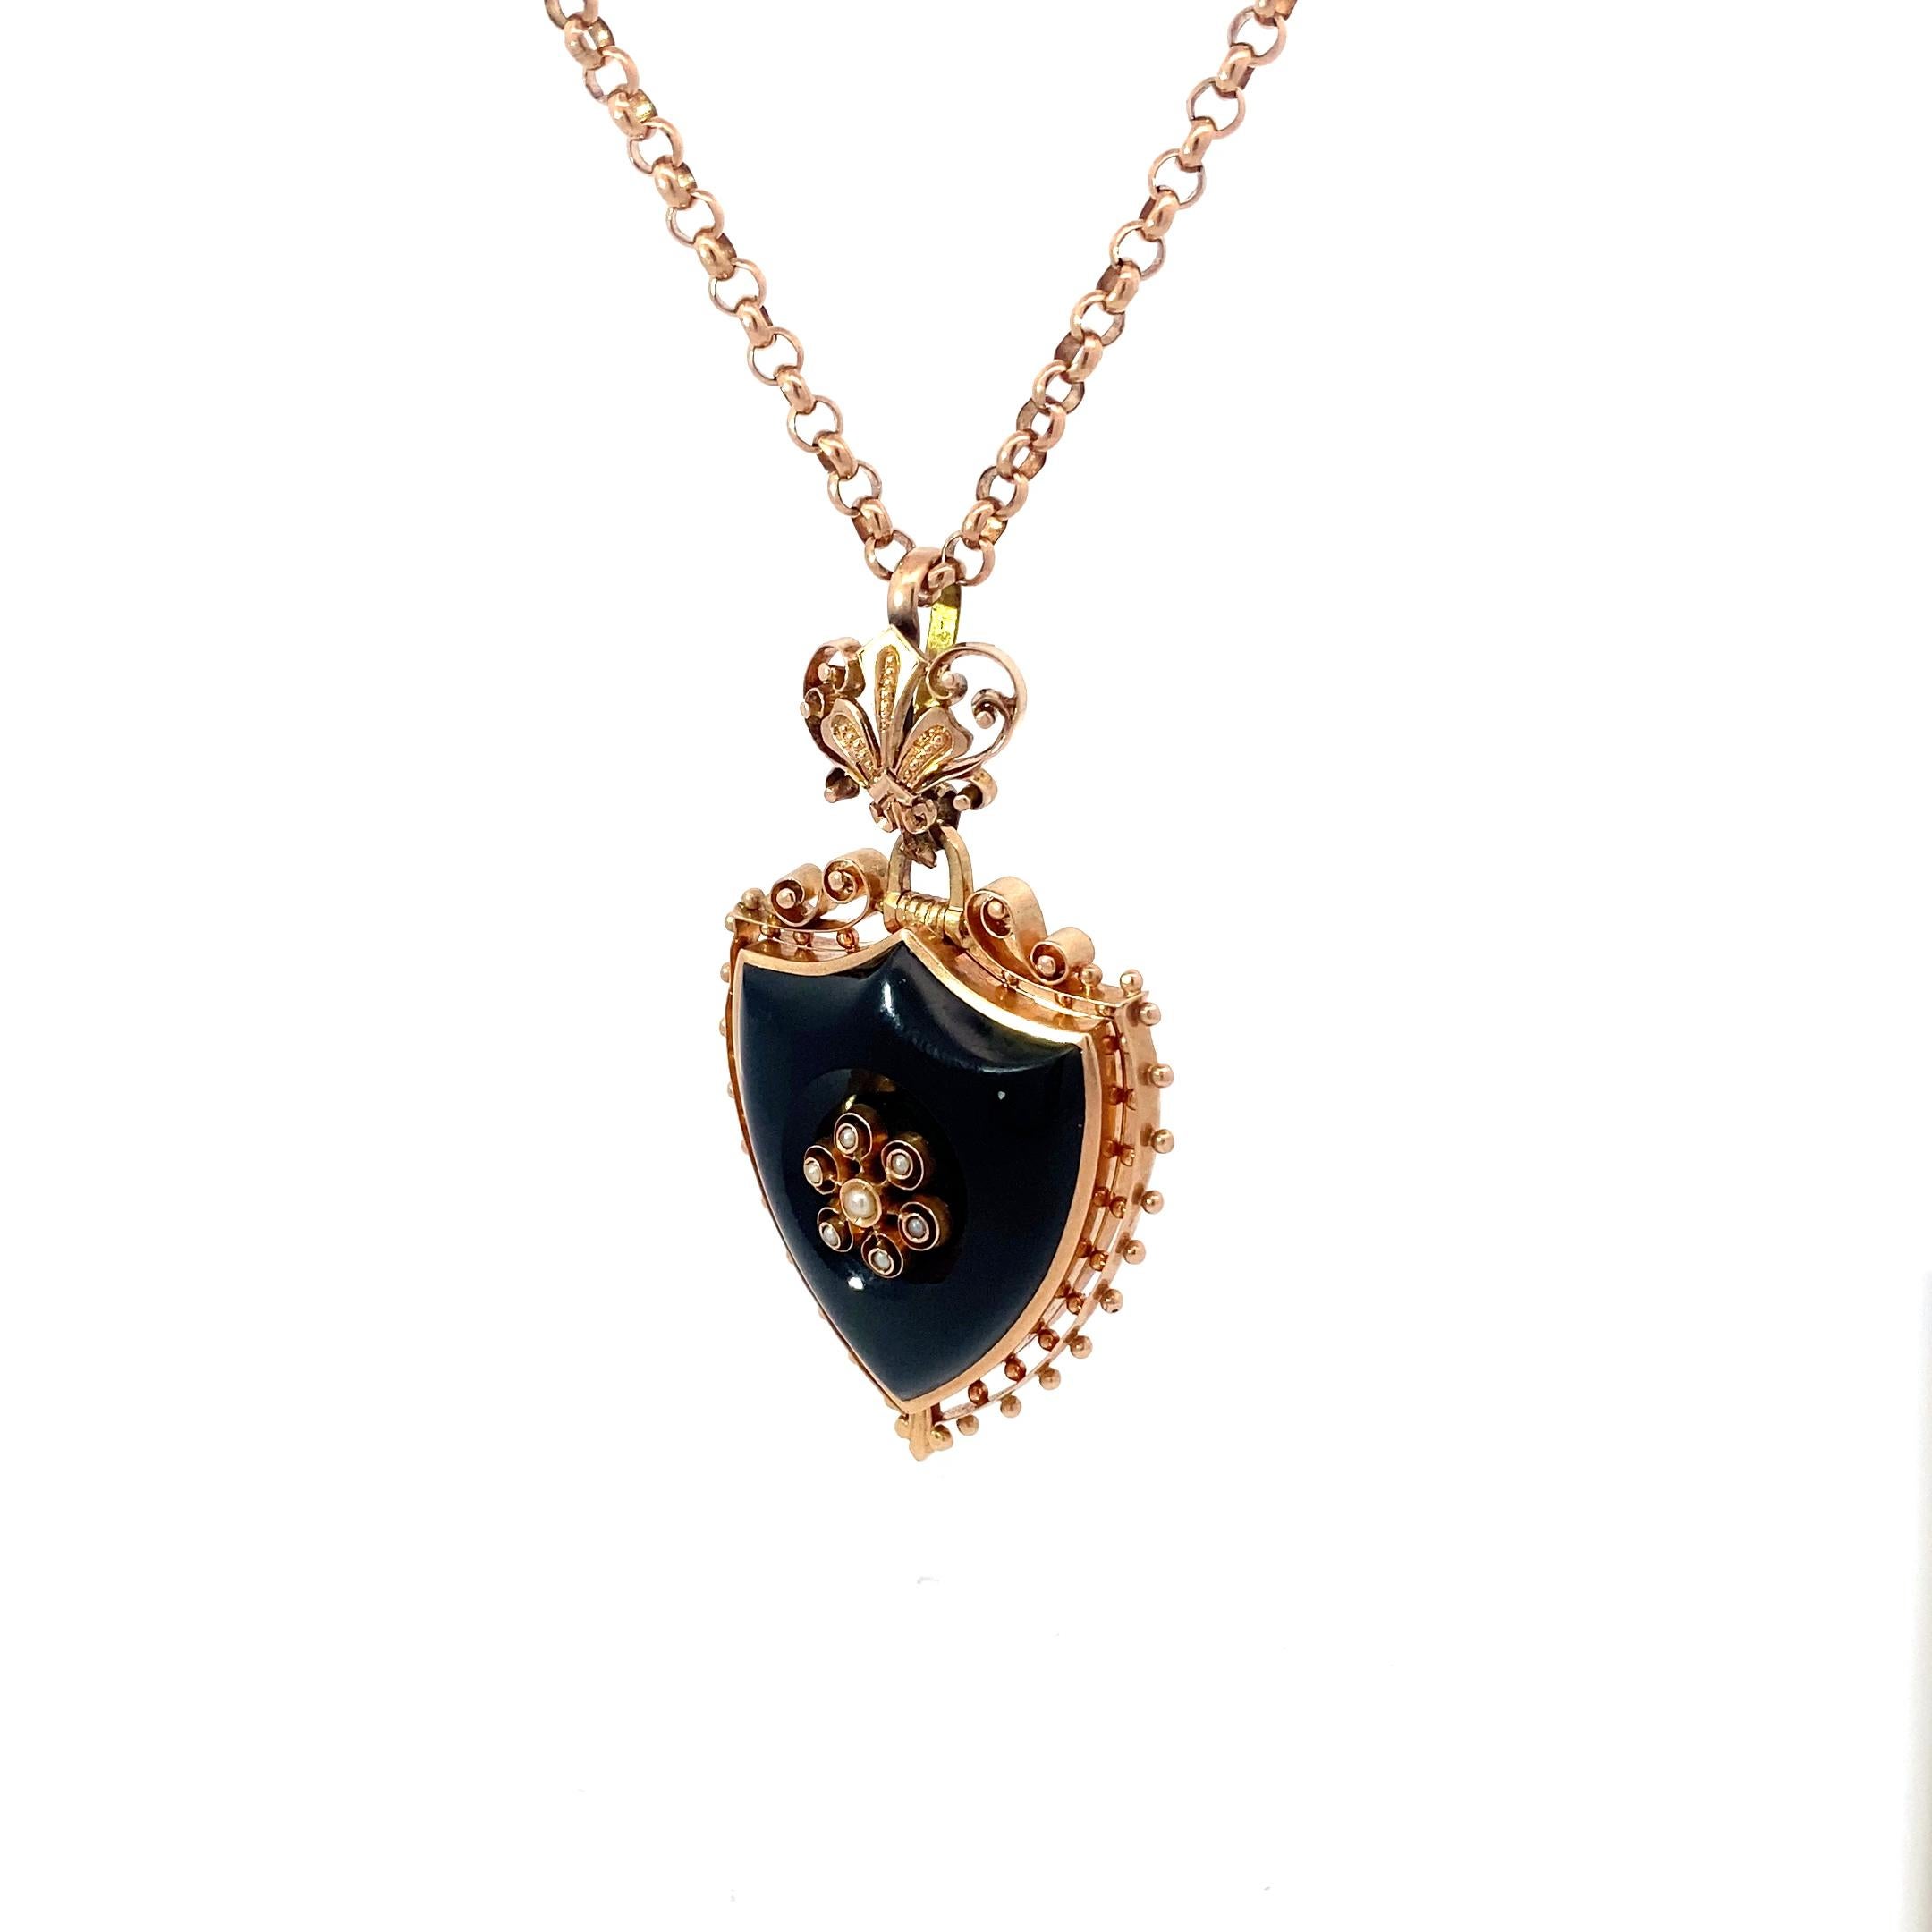 Wonderfully large carved onyx locket in the shape of a shield. The carved onyx is wrapped in luxe 14k gold detailing, including an ornate filagree bail affixing it to an 18in round link chain. The gold detailing and the chain has a subtle rosy